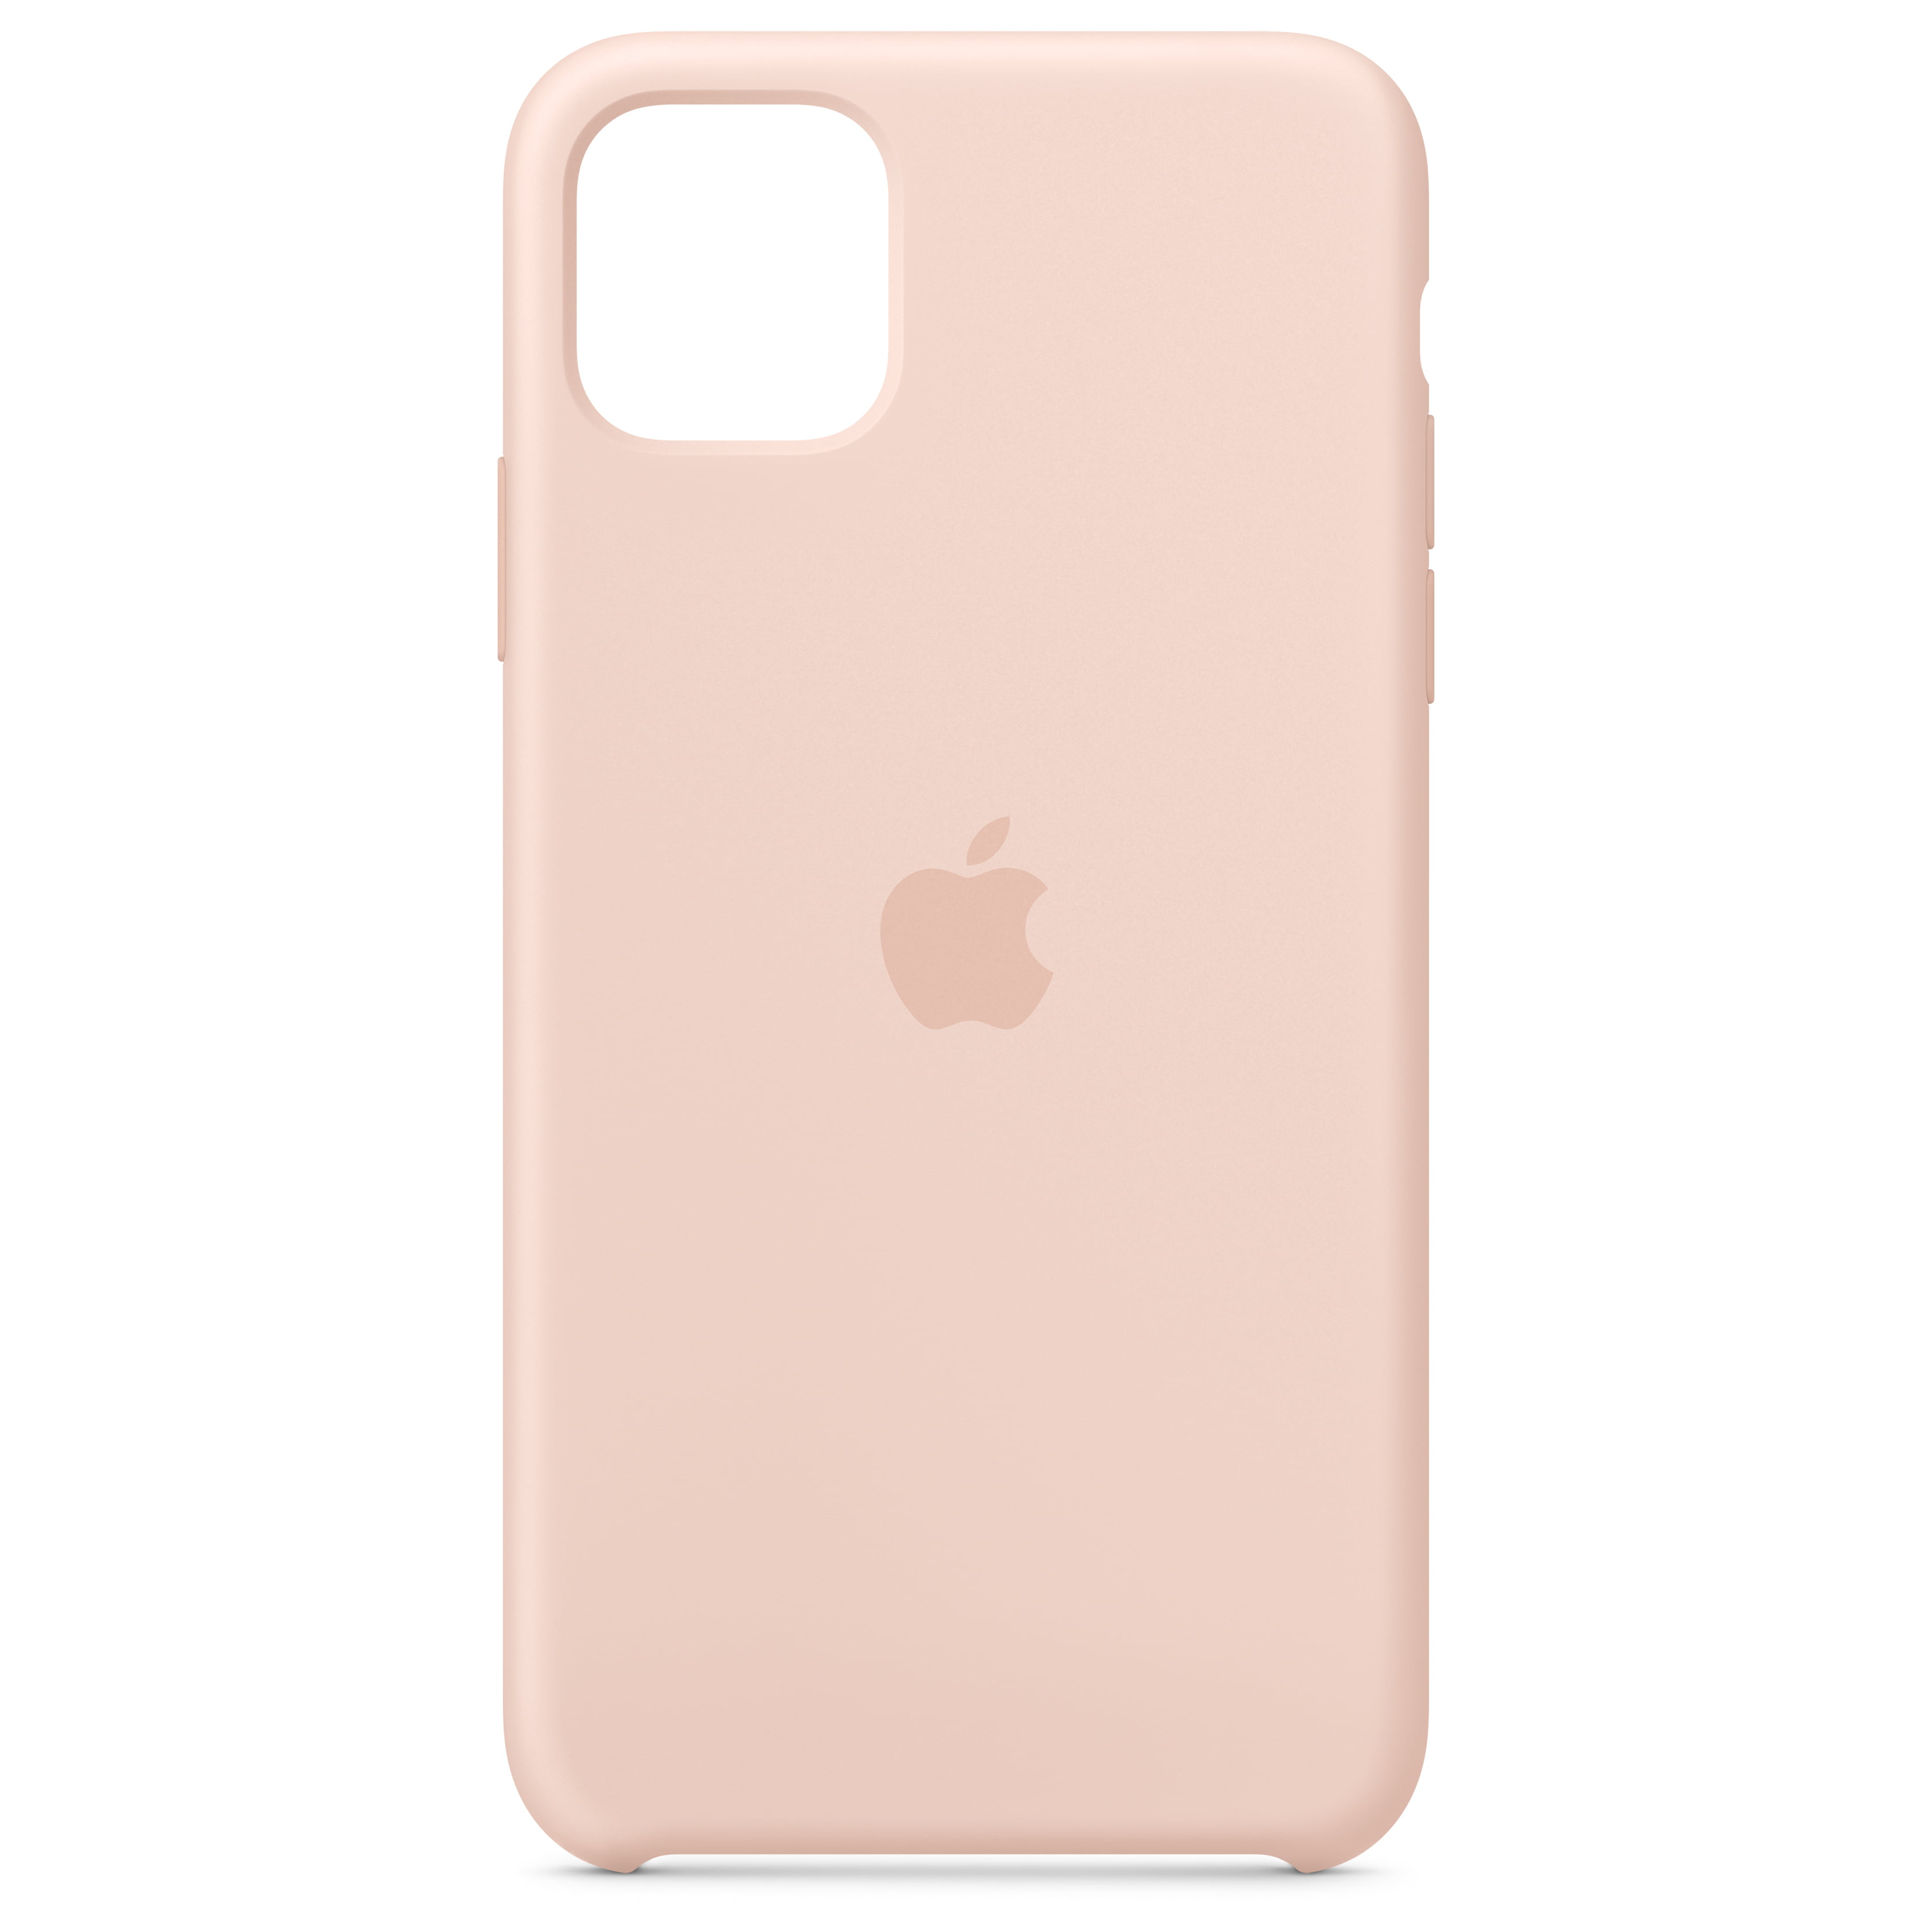 iPhone 11 Pro Silicone Case - Clementine - Education - Apple